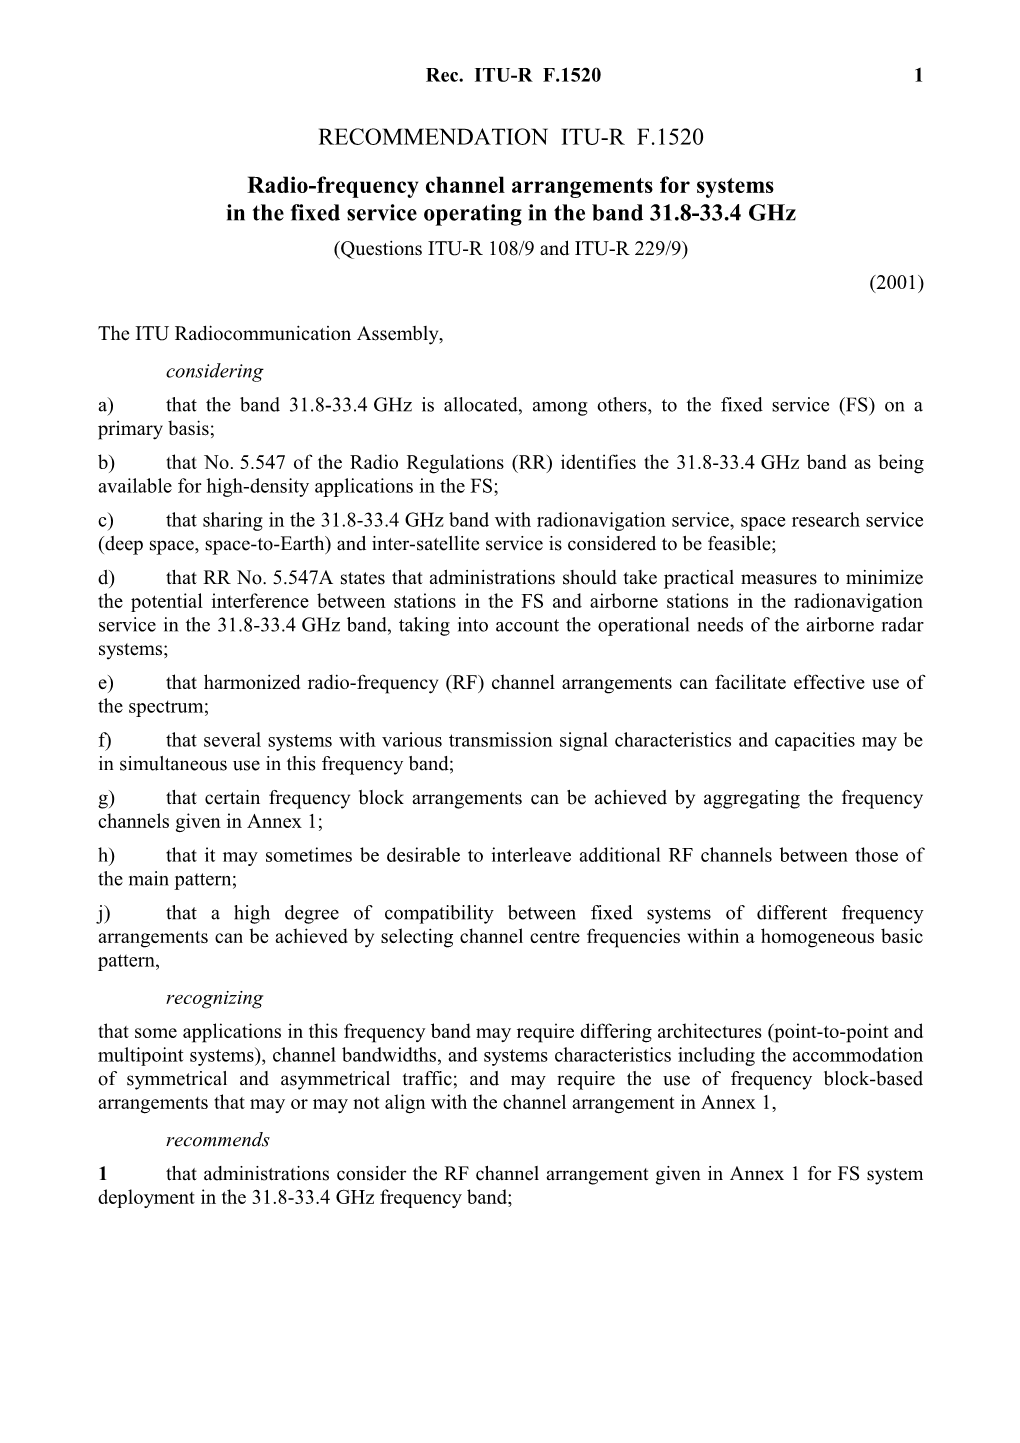 RECOMMENDATION ITU-R F.1520 - Radio-Frequency Channel Arrangements for Systems